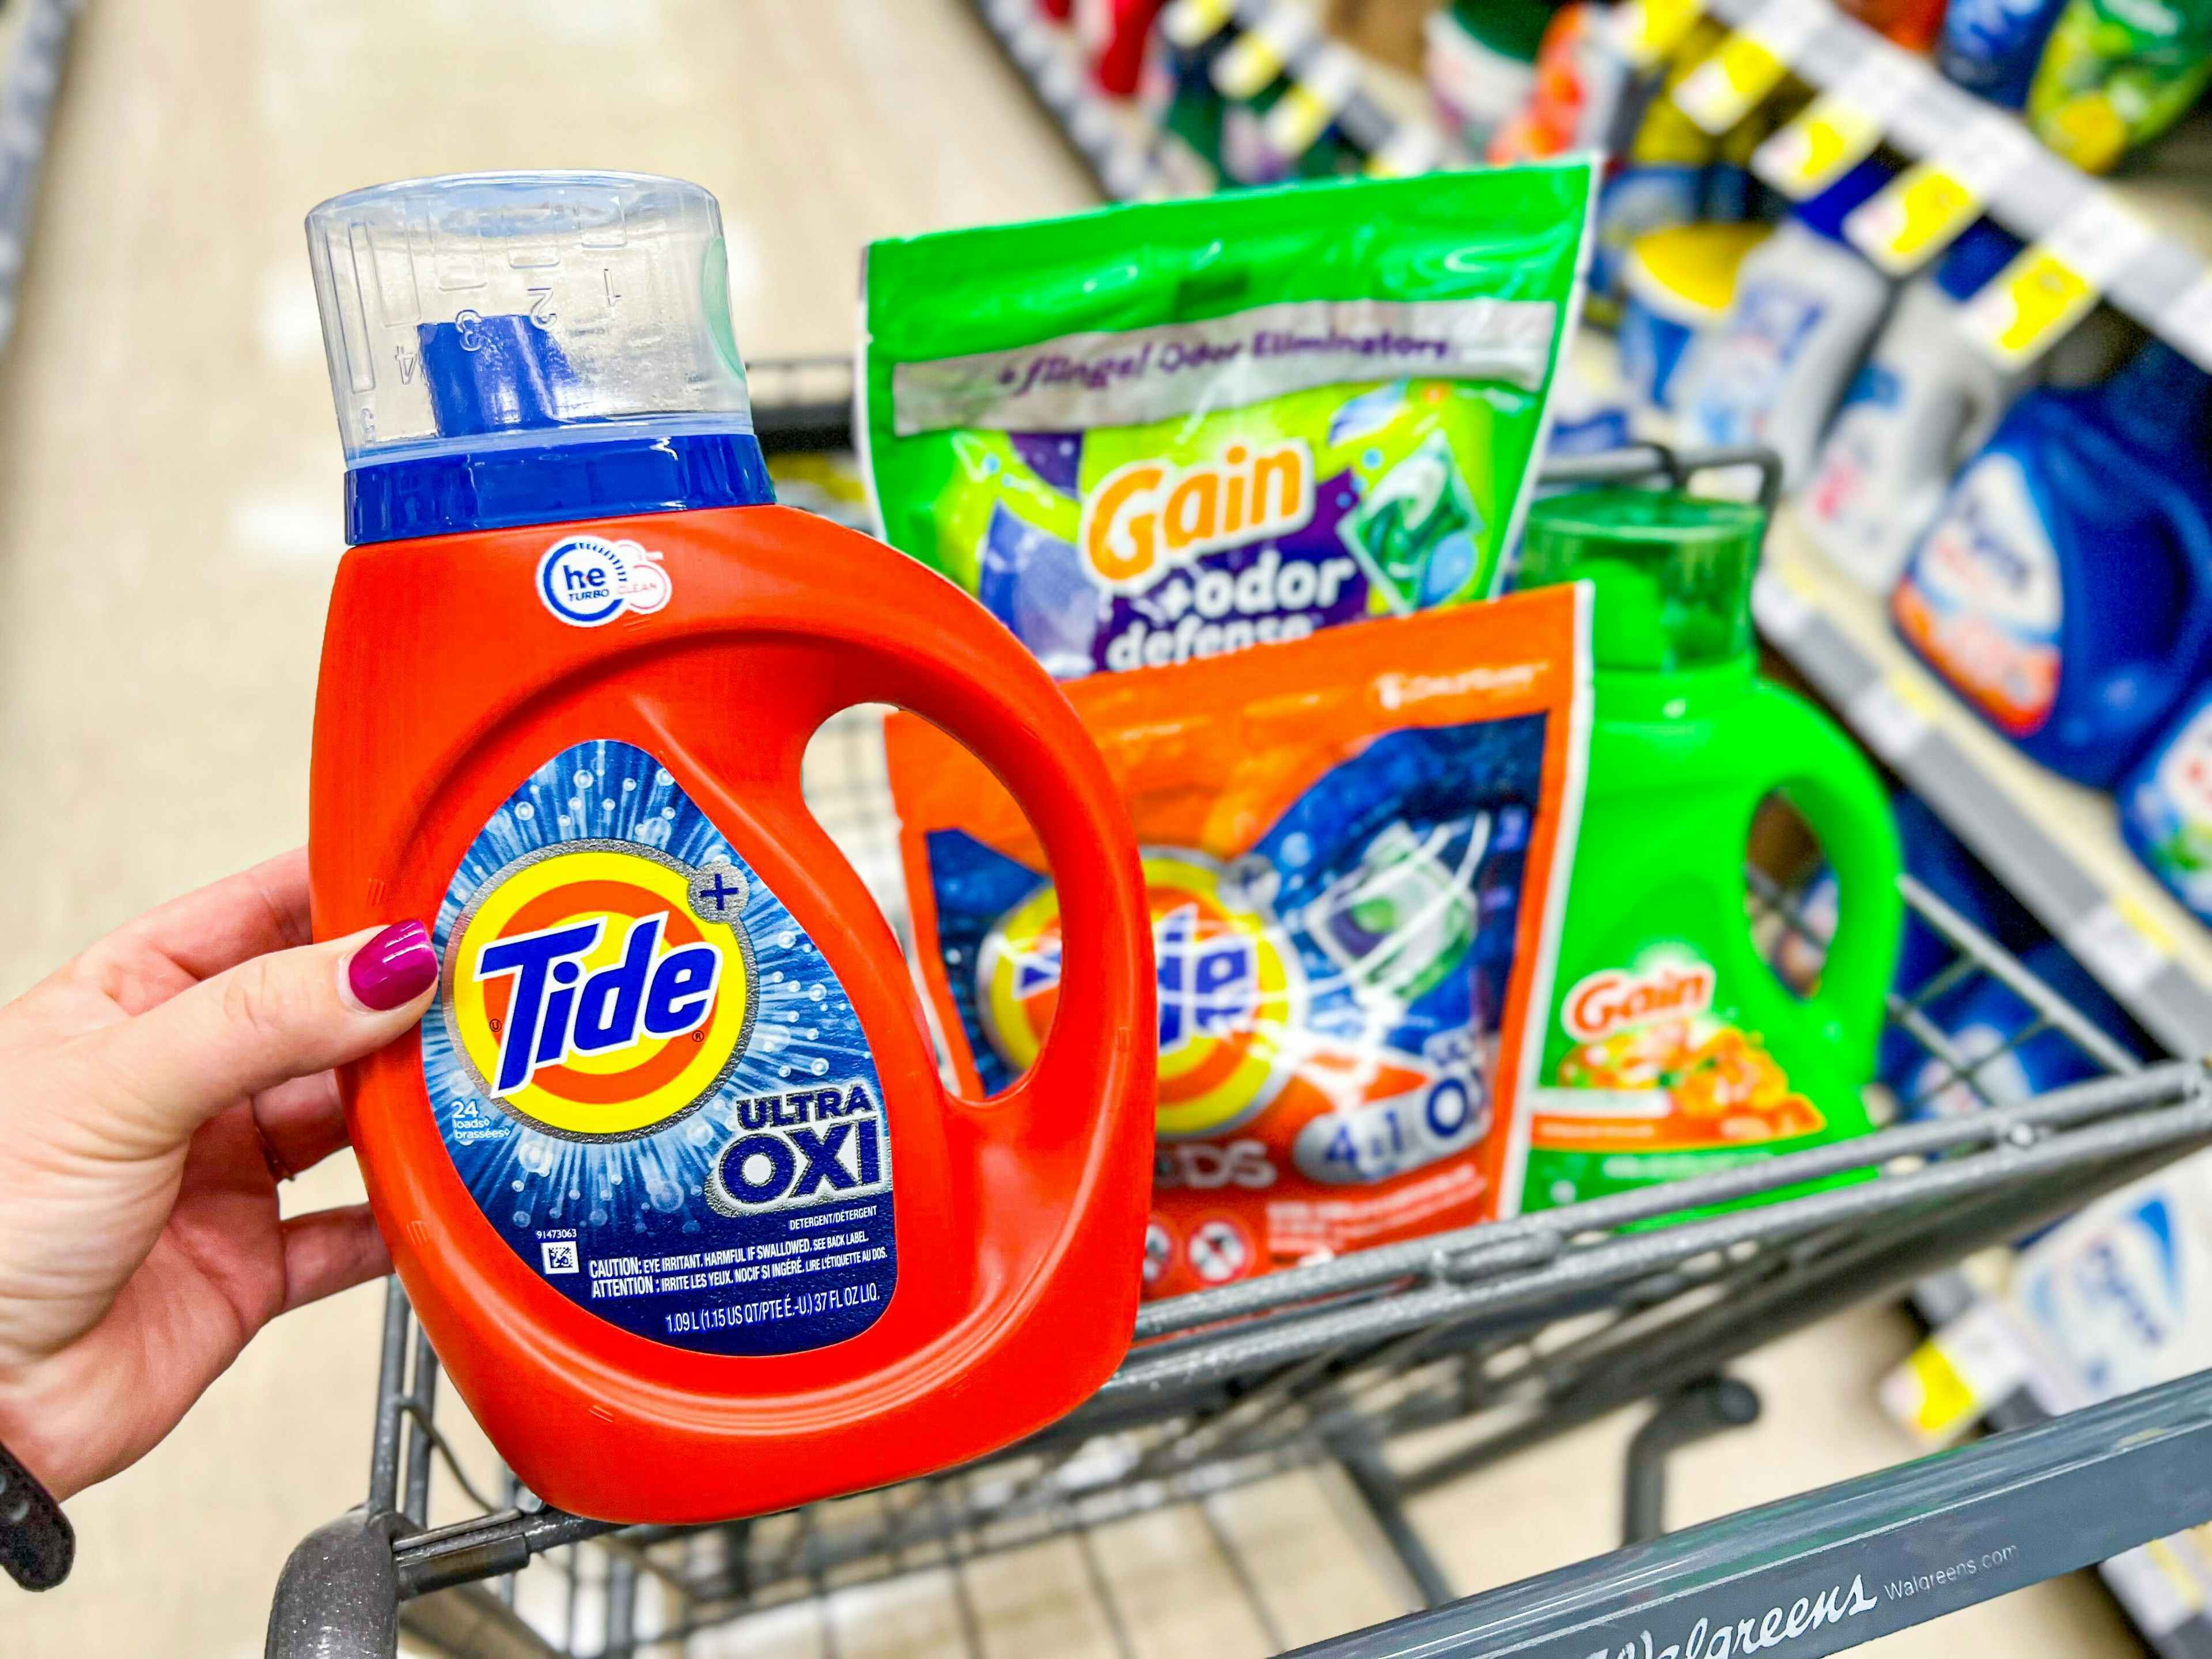 walgreens cart with gain and tide laundry detergent